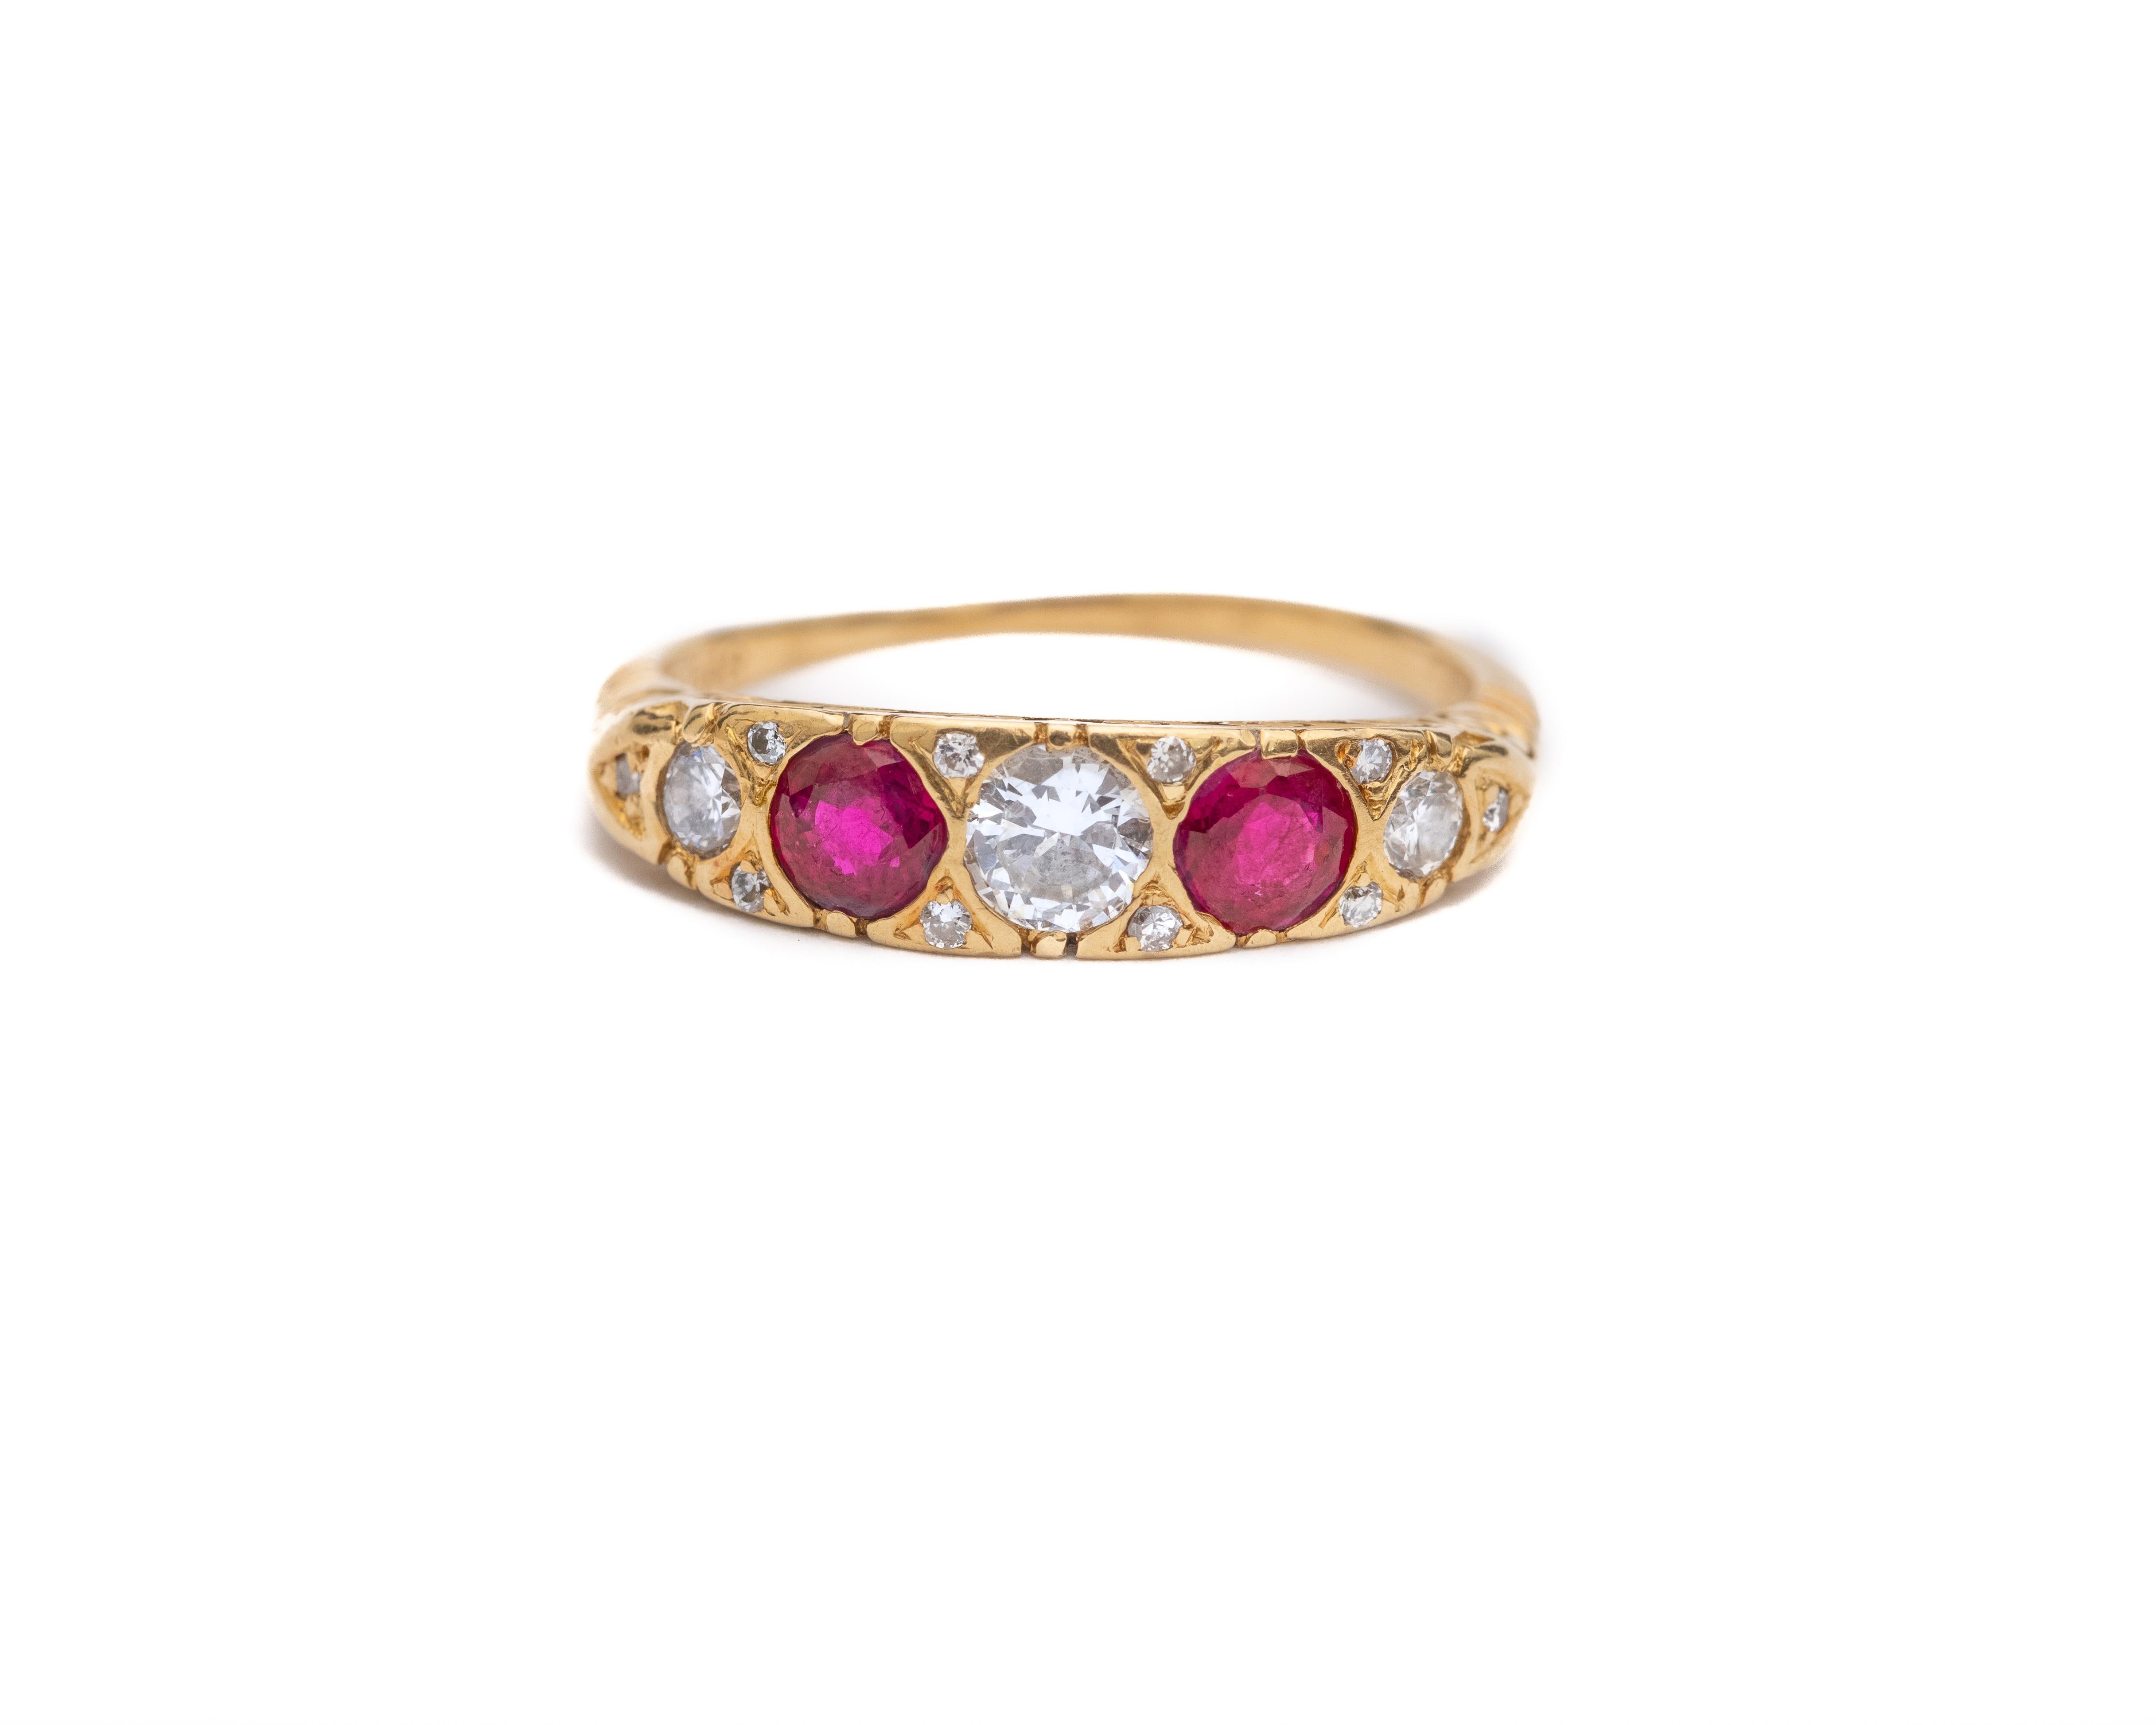 Item Description: 
Metal type: 18 Karat Yellow Gold
Weight: 2.6 grams
Ring Size: 5 (resizable)

Diamond Details;
Cut: Old European Cut
Carat: .48 carats
Weight: G
Clarity: VS

Ruby Details:
Color: Deep Pigeon Blood Red
Stone Count: 2
Carat: .3